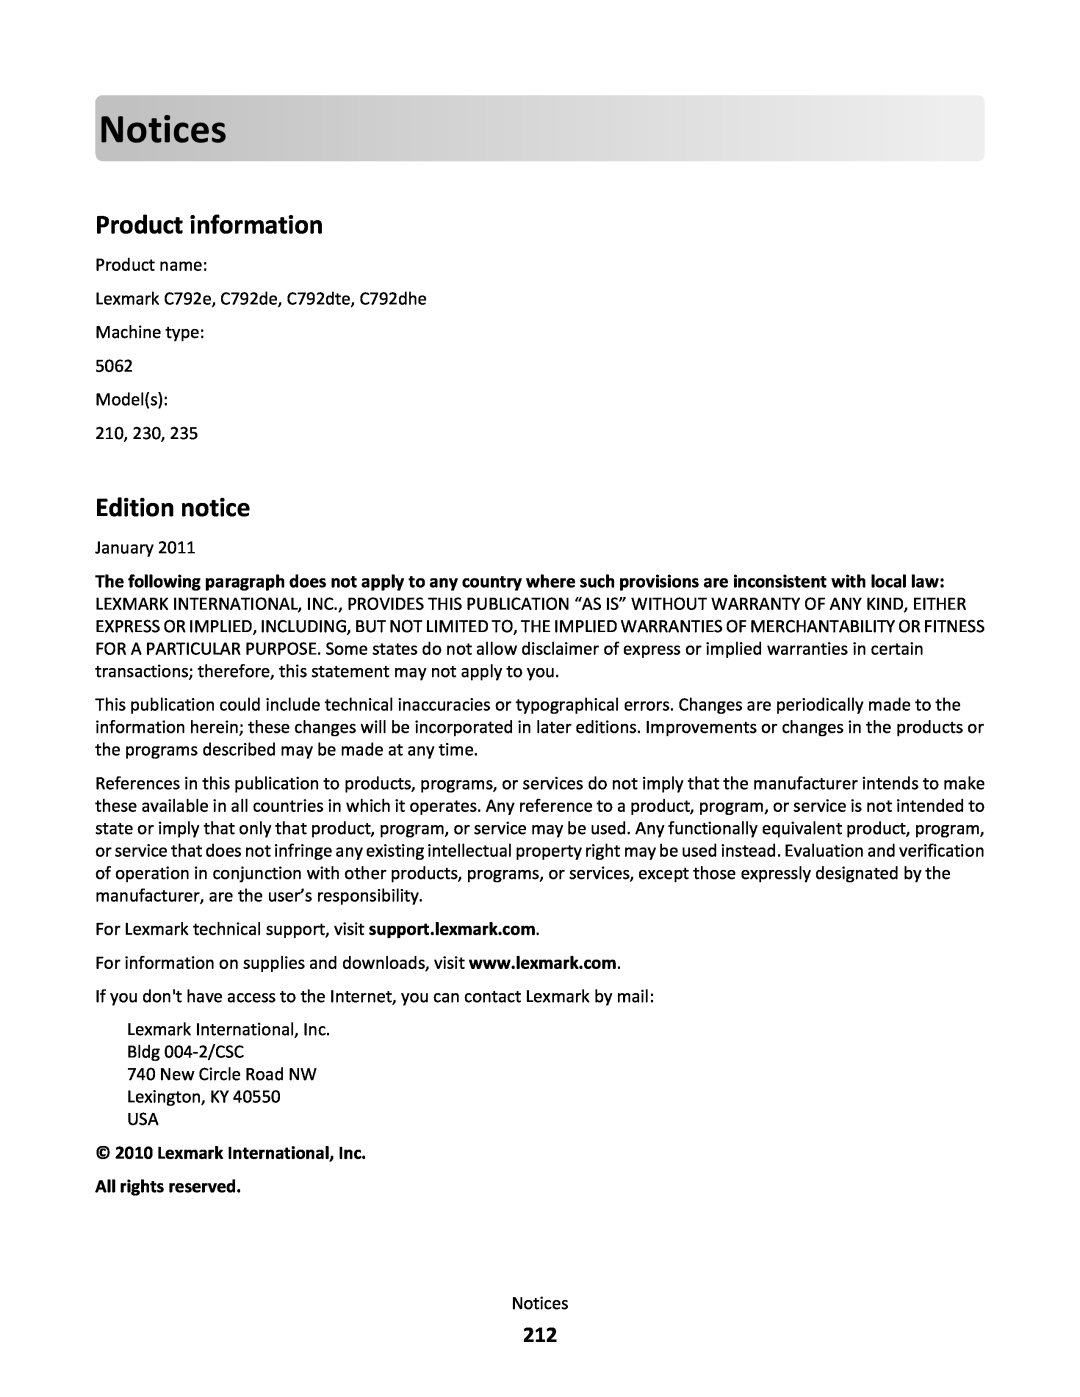 Lexmark C790 manual Notices, Product information, Edition notice, Lexmark International, Inc All rights reserved 